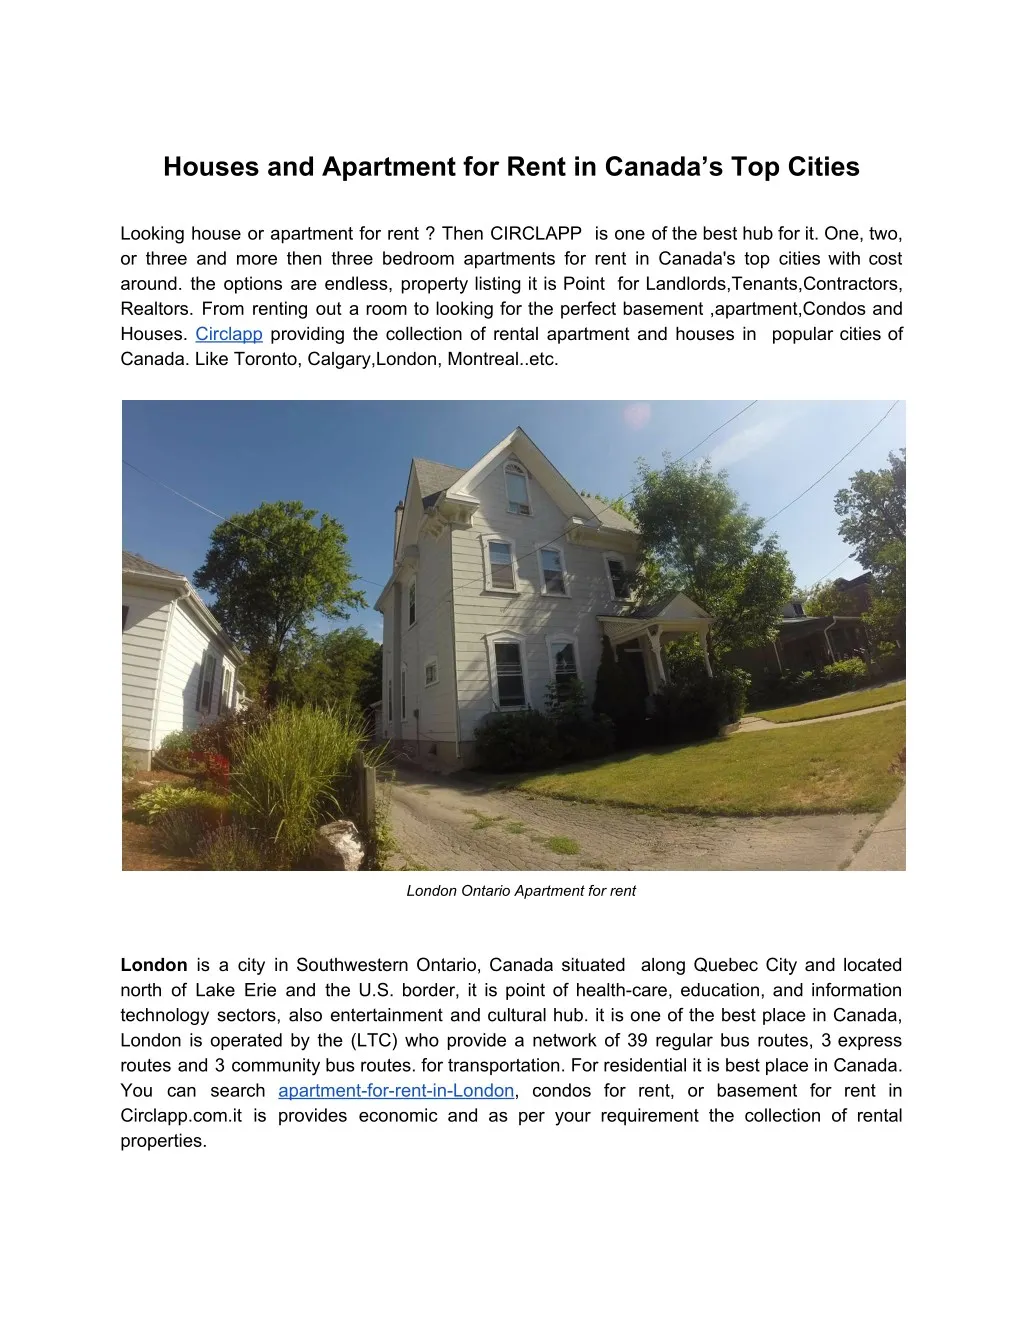 houses and apartment for rent in canada